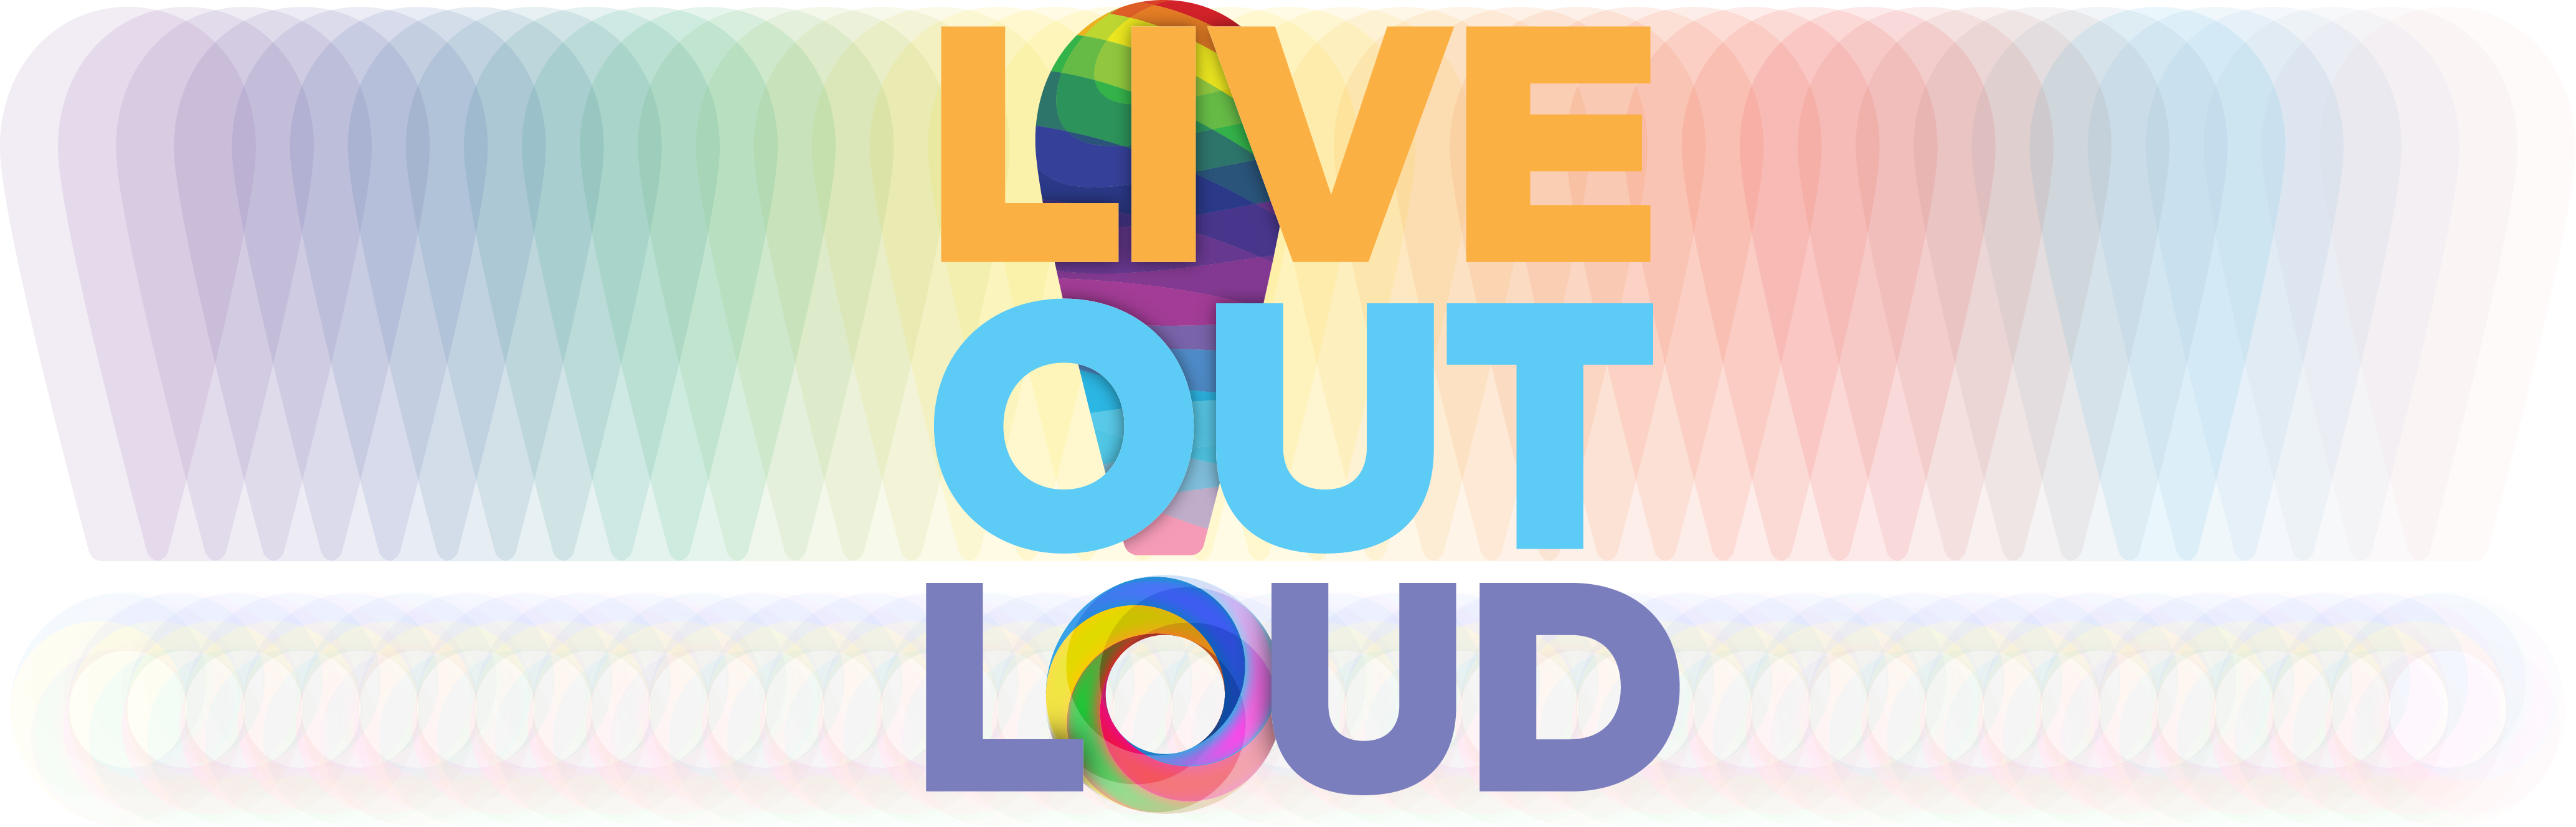 LIVE OUT LOUD